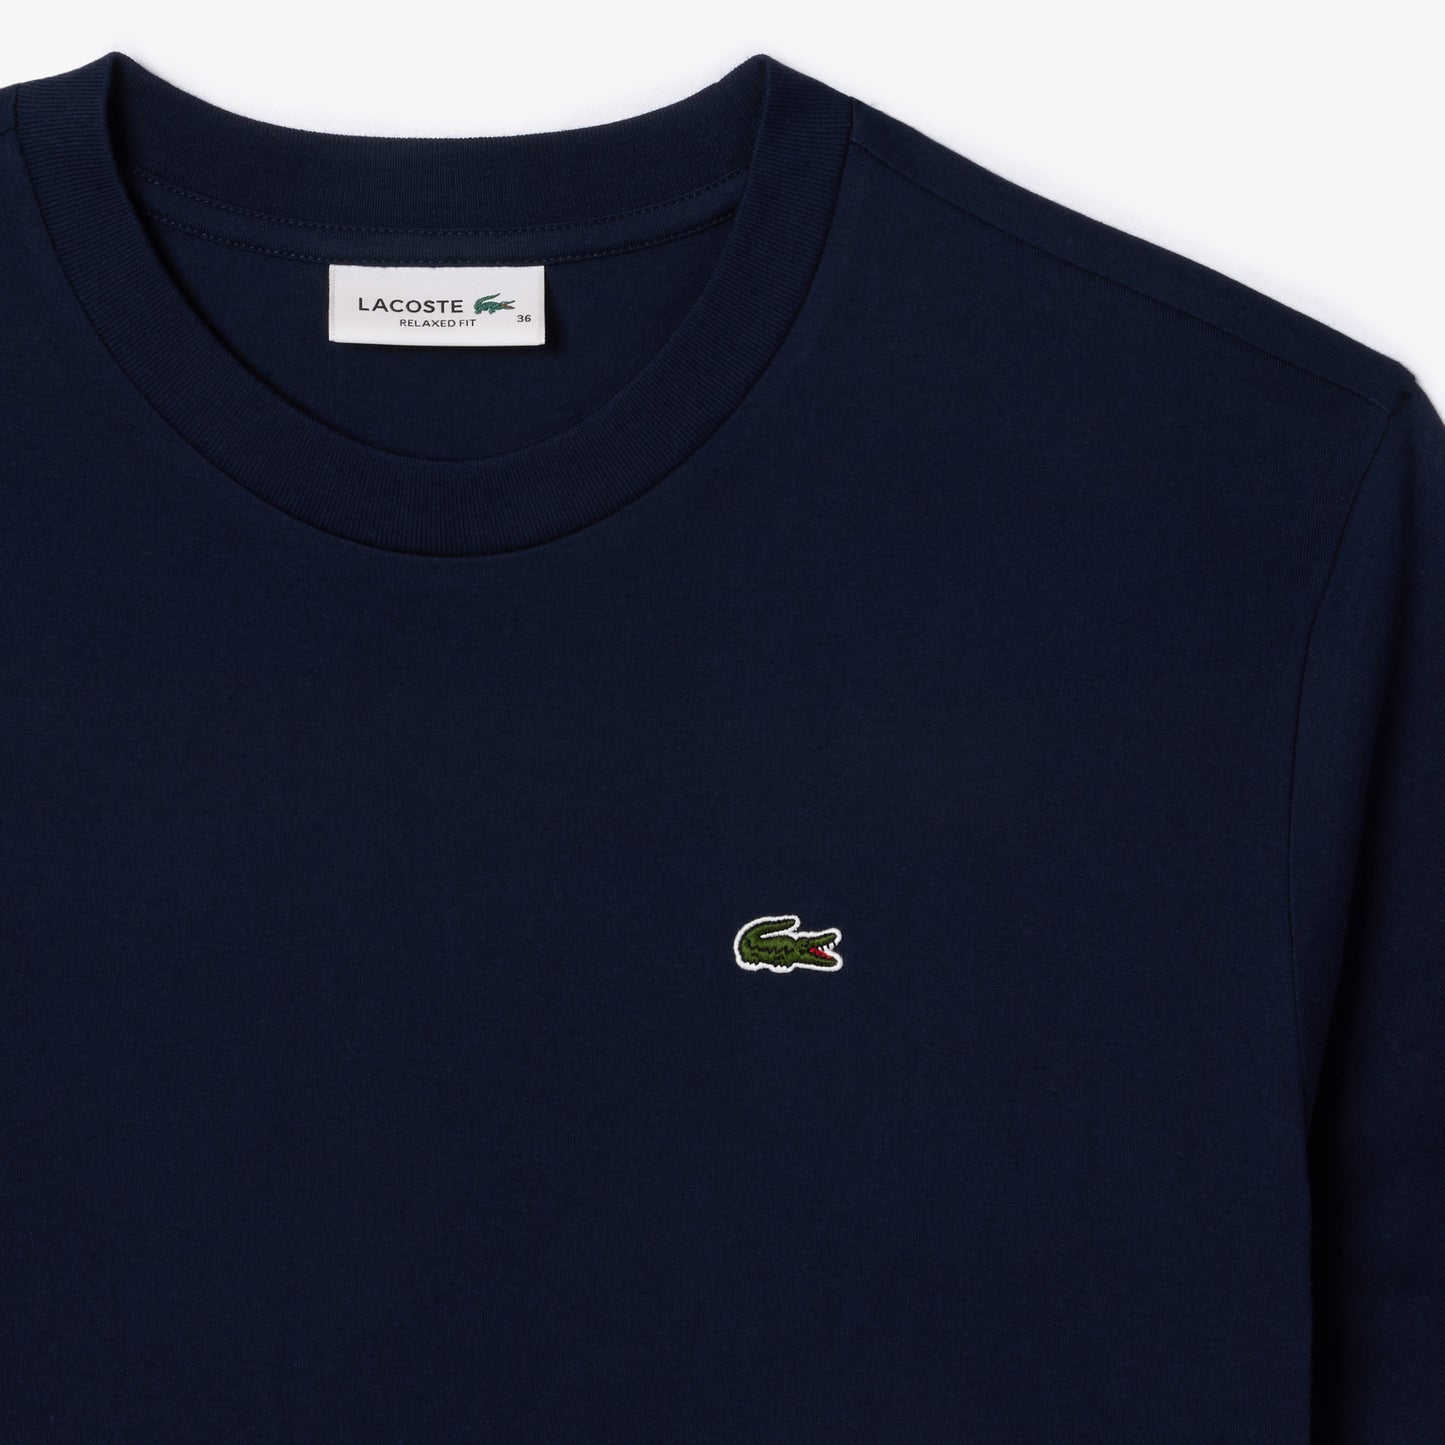 LACOSTE TF7215-166